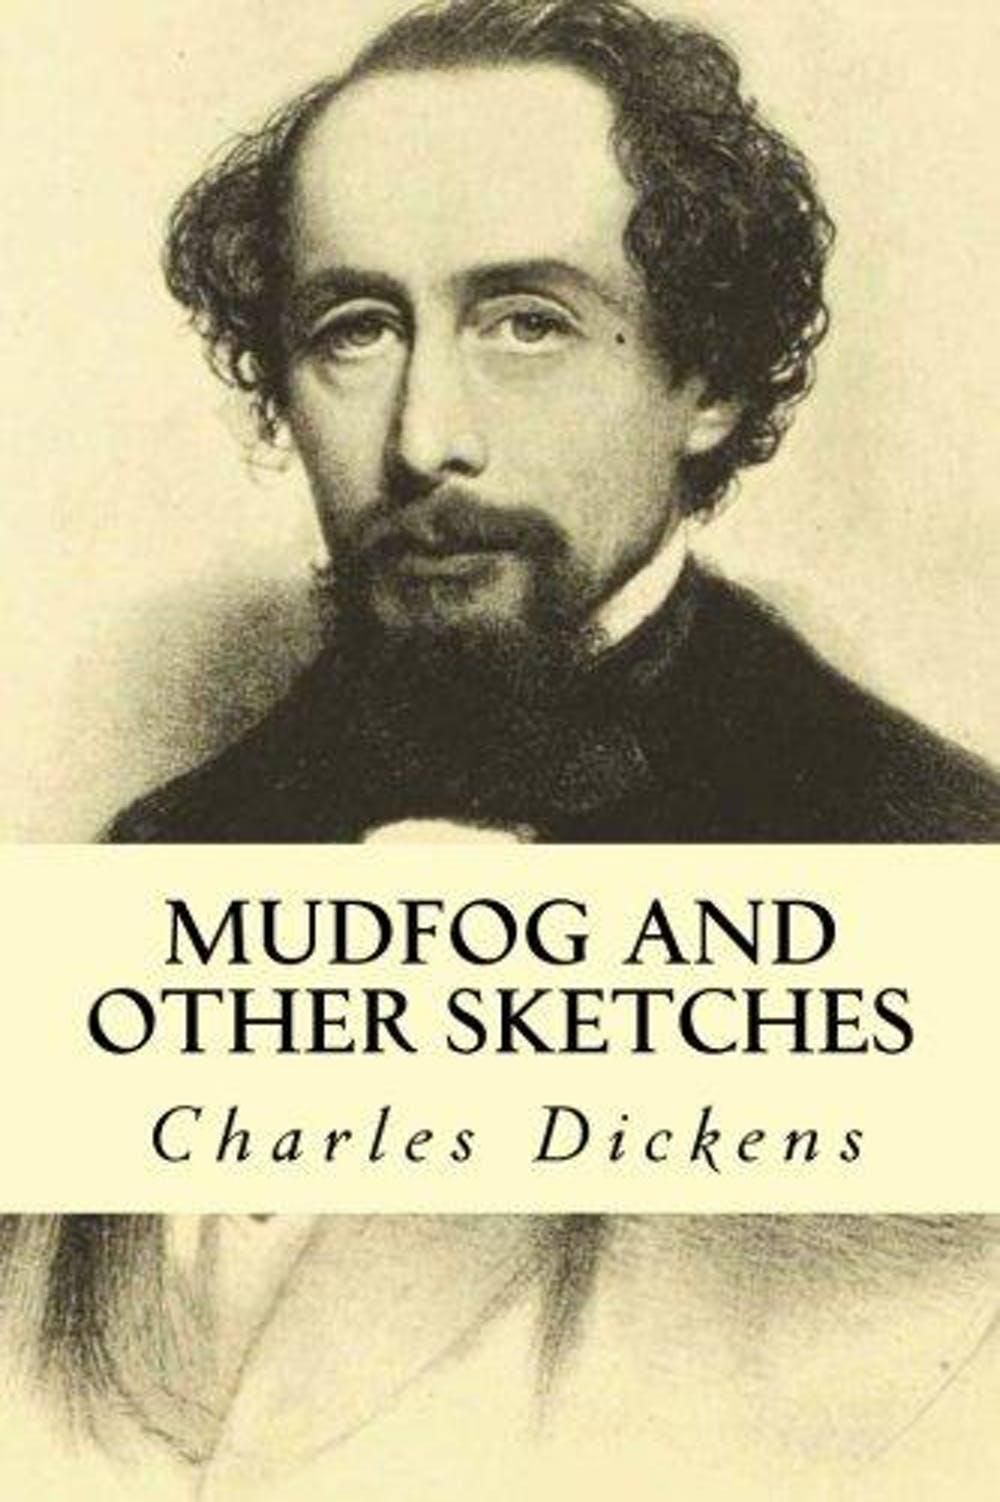 Dickens’ dystopia is in a book of short stories.